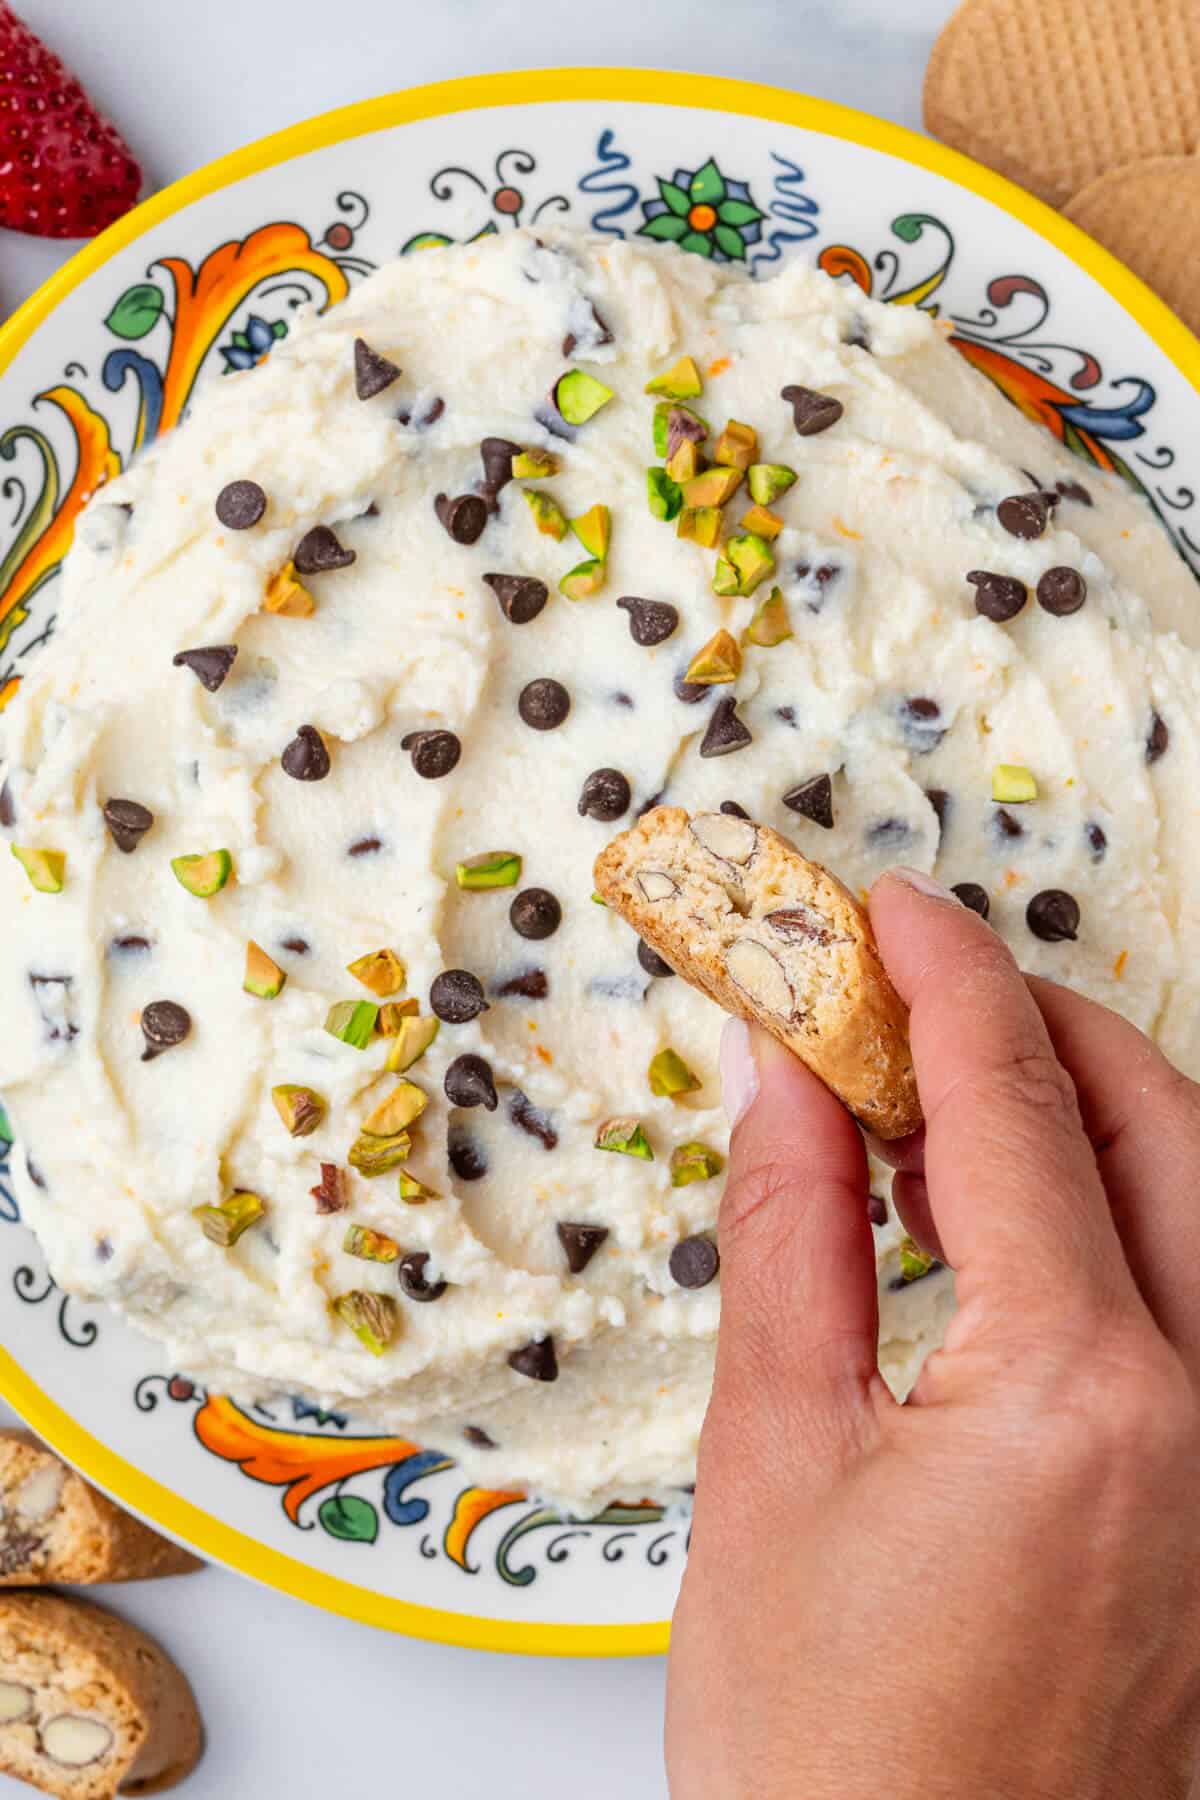 Biscotti being dipped into a a plate of cannoli dip